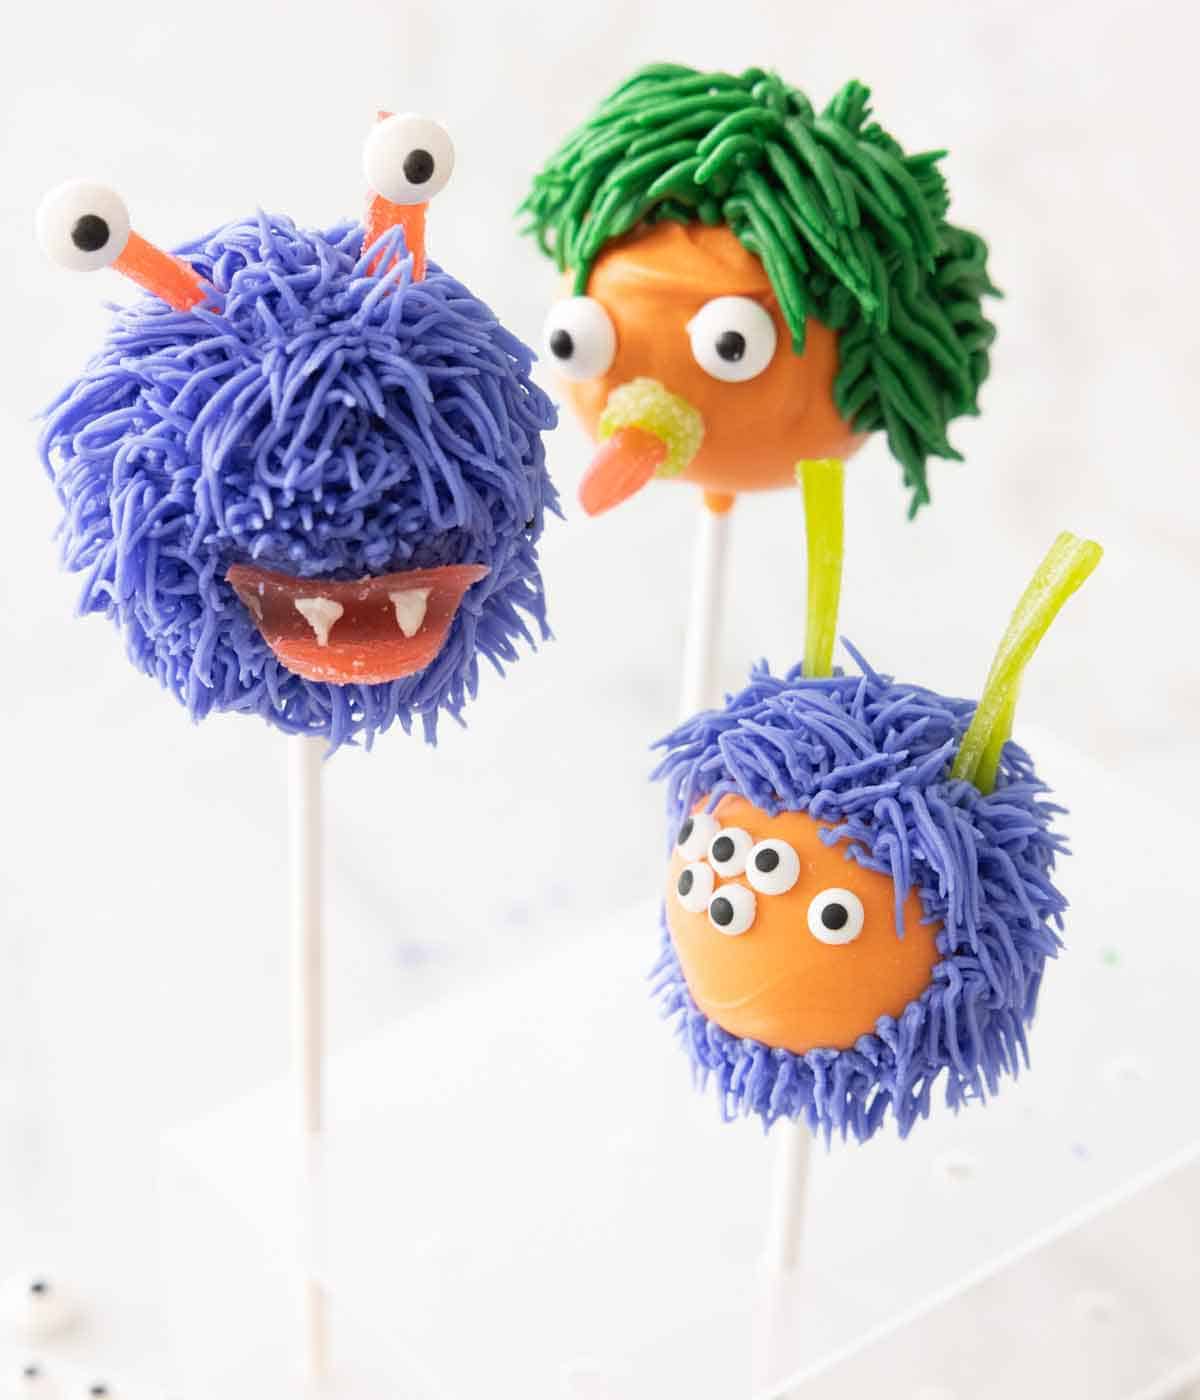 Three Halloween cake pops decorated as monsters.